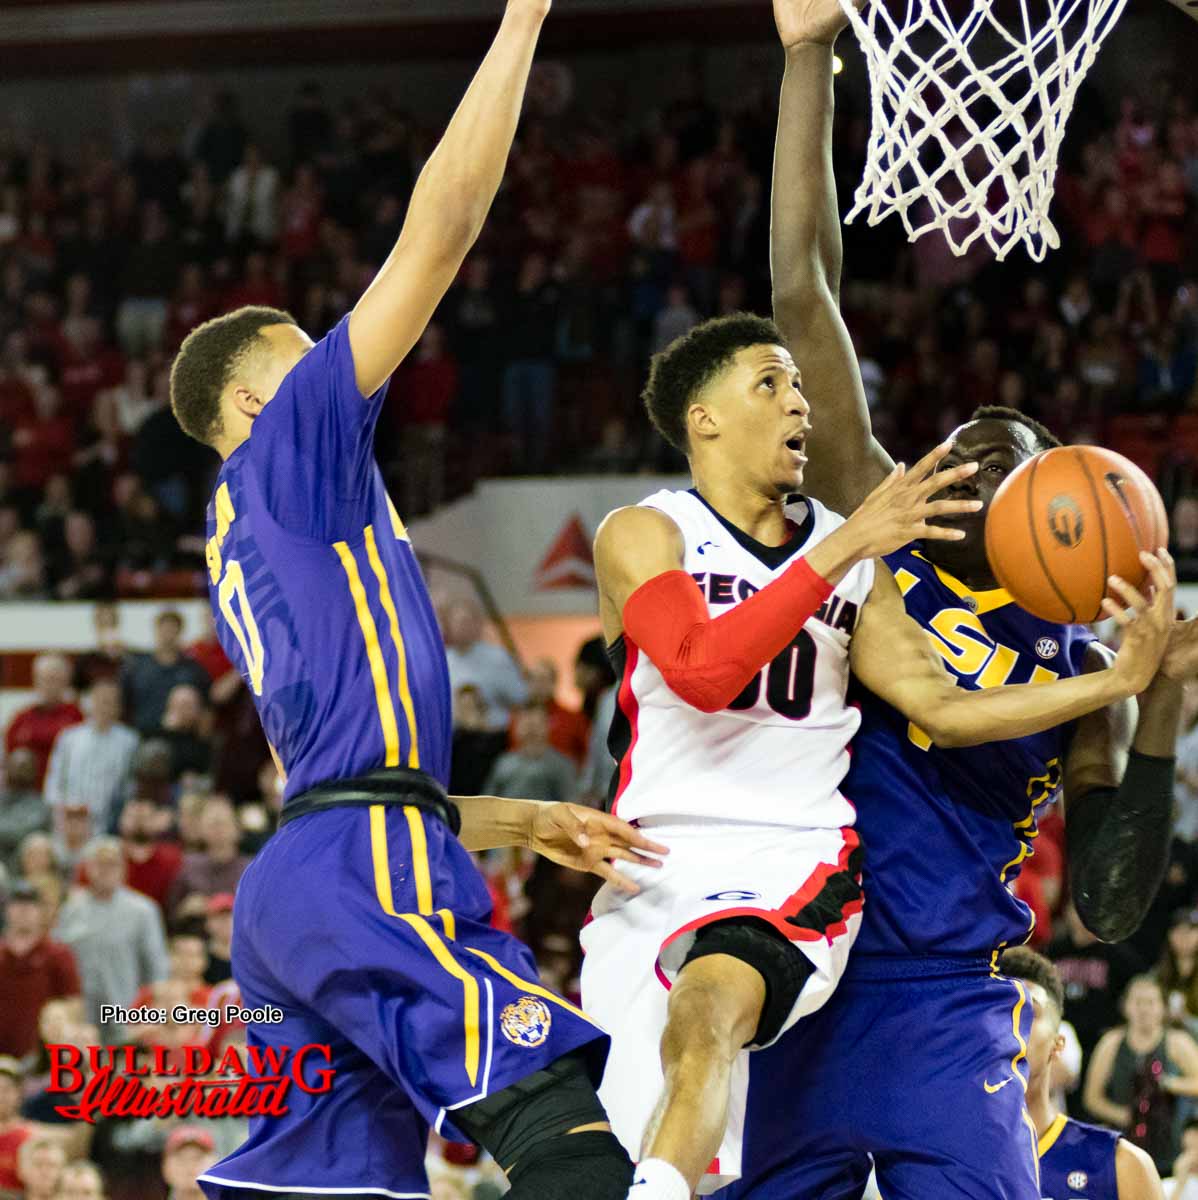 J.J. Frazier drives late in the 2nd half